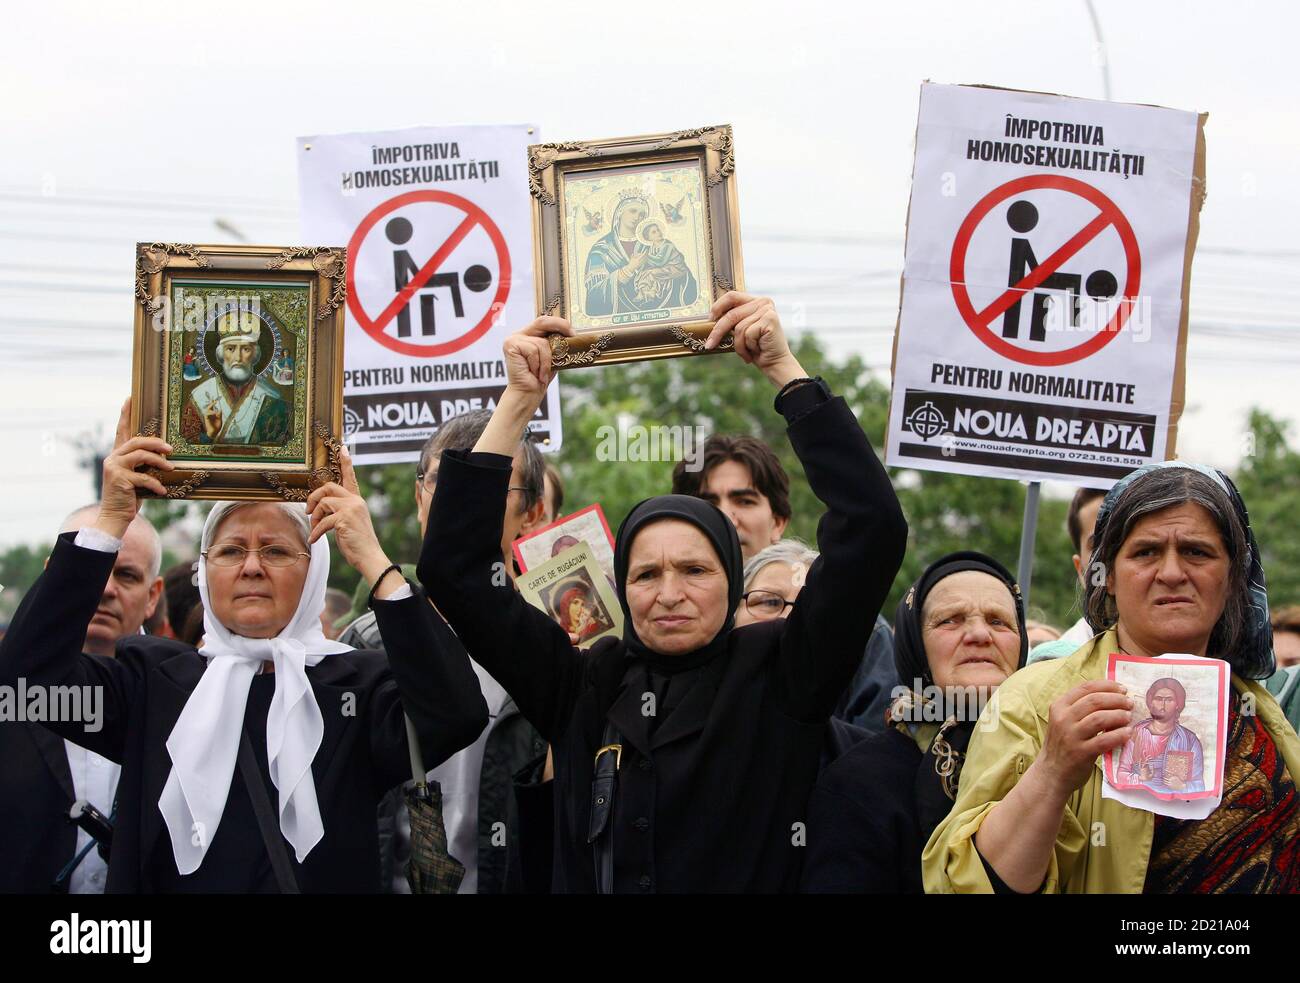 Romanians hold Orthodox icons and anti-homosexuals signs during a protest against a scheduled gay parade through the capital, in Bucharest June 3, 2006. The banners read 'Against homosexuality - for normality. Stock Photo